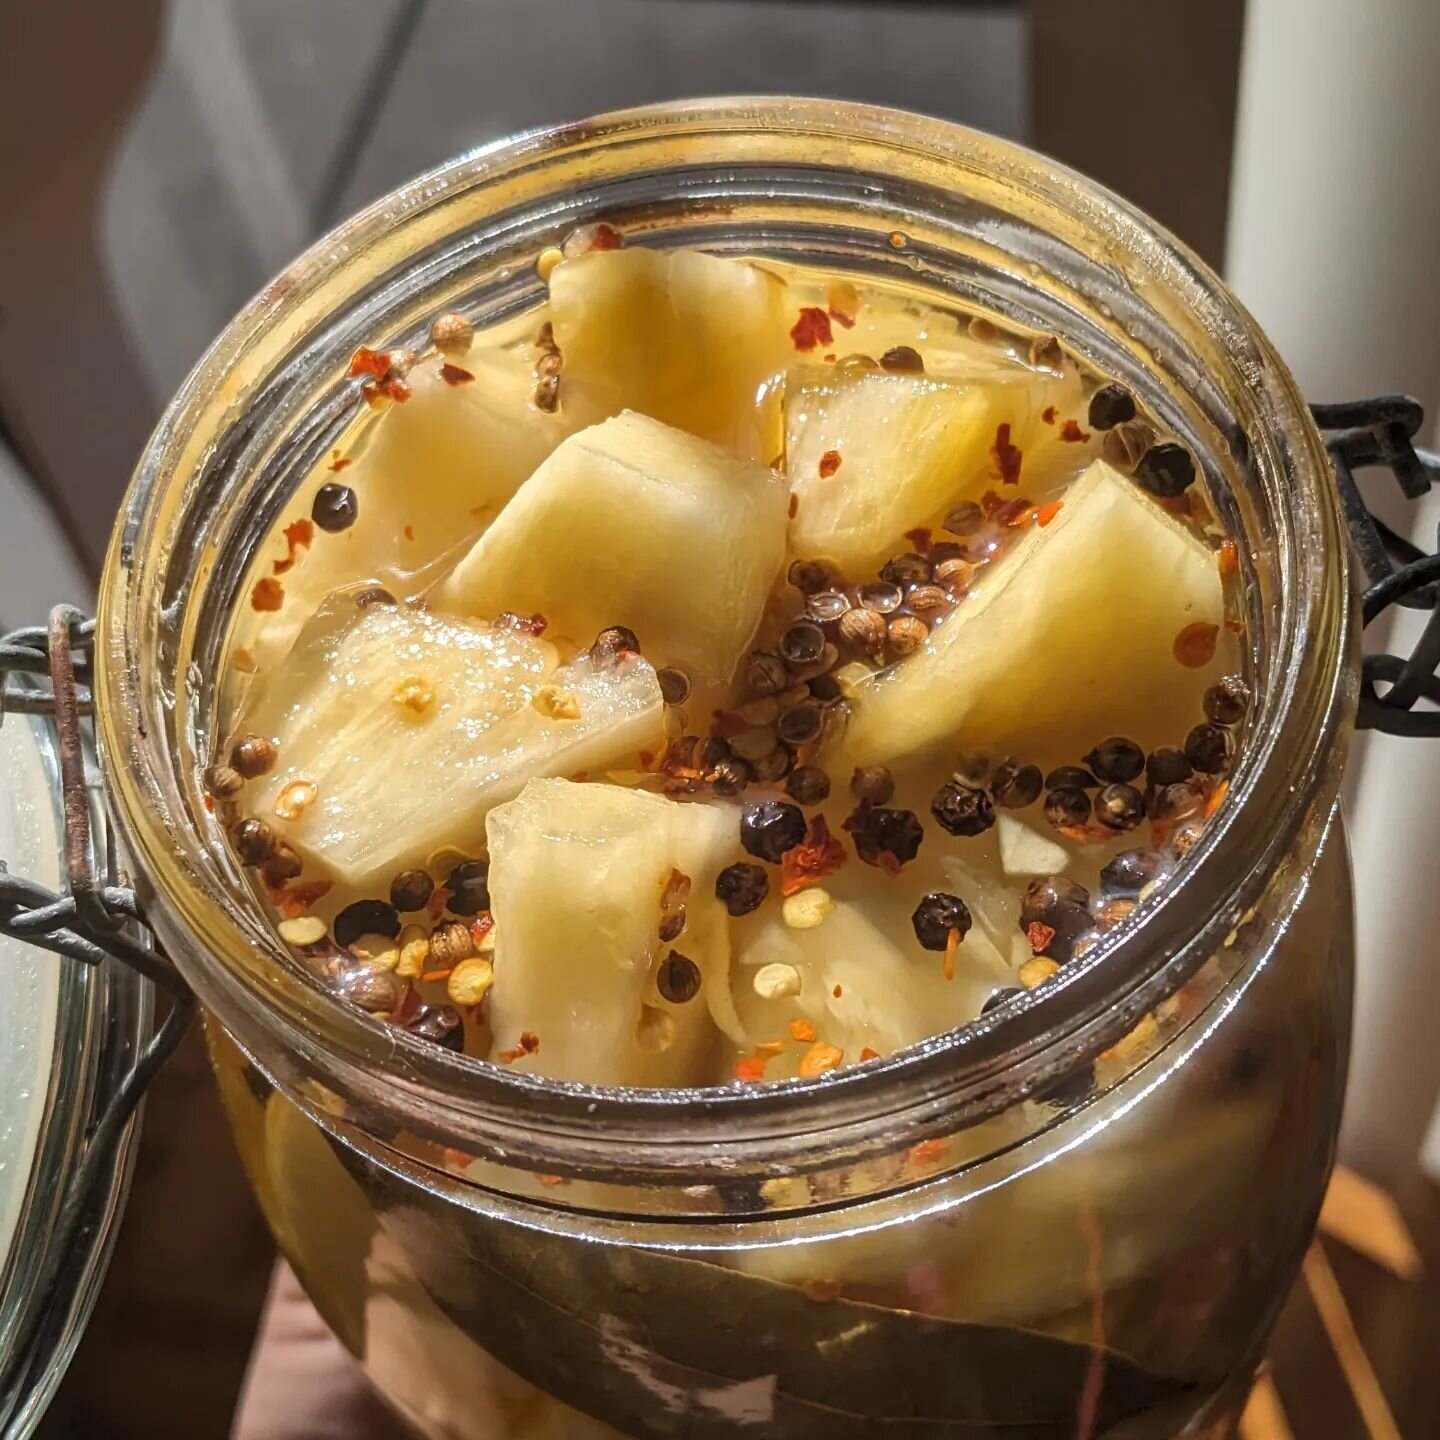 Spicy pickled pineapple
Inspired by the pickle goddess @serialpickler recipe

It's hard to untaste this one. Absolutely bonkers great.

#pickles #fermented #pickling #pickledfruit #snack #condiments #spicyfood #pineapple